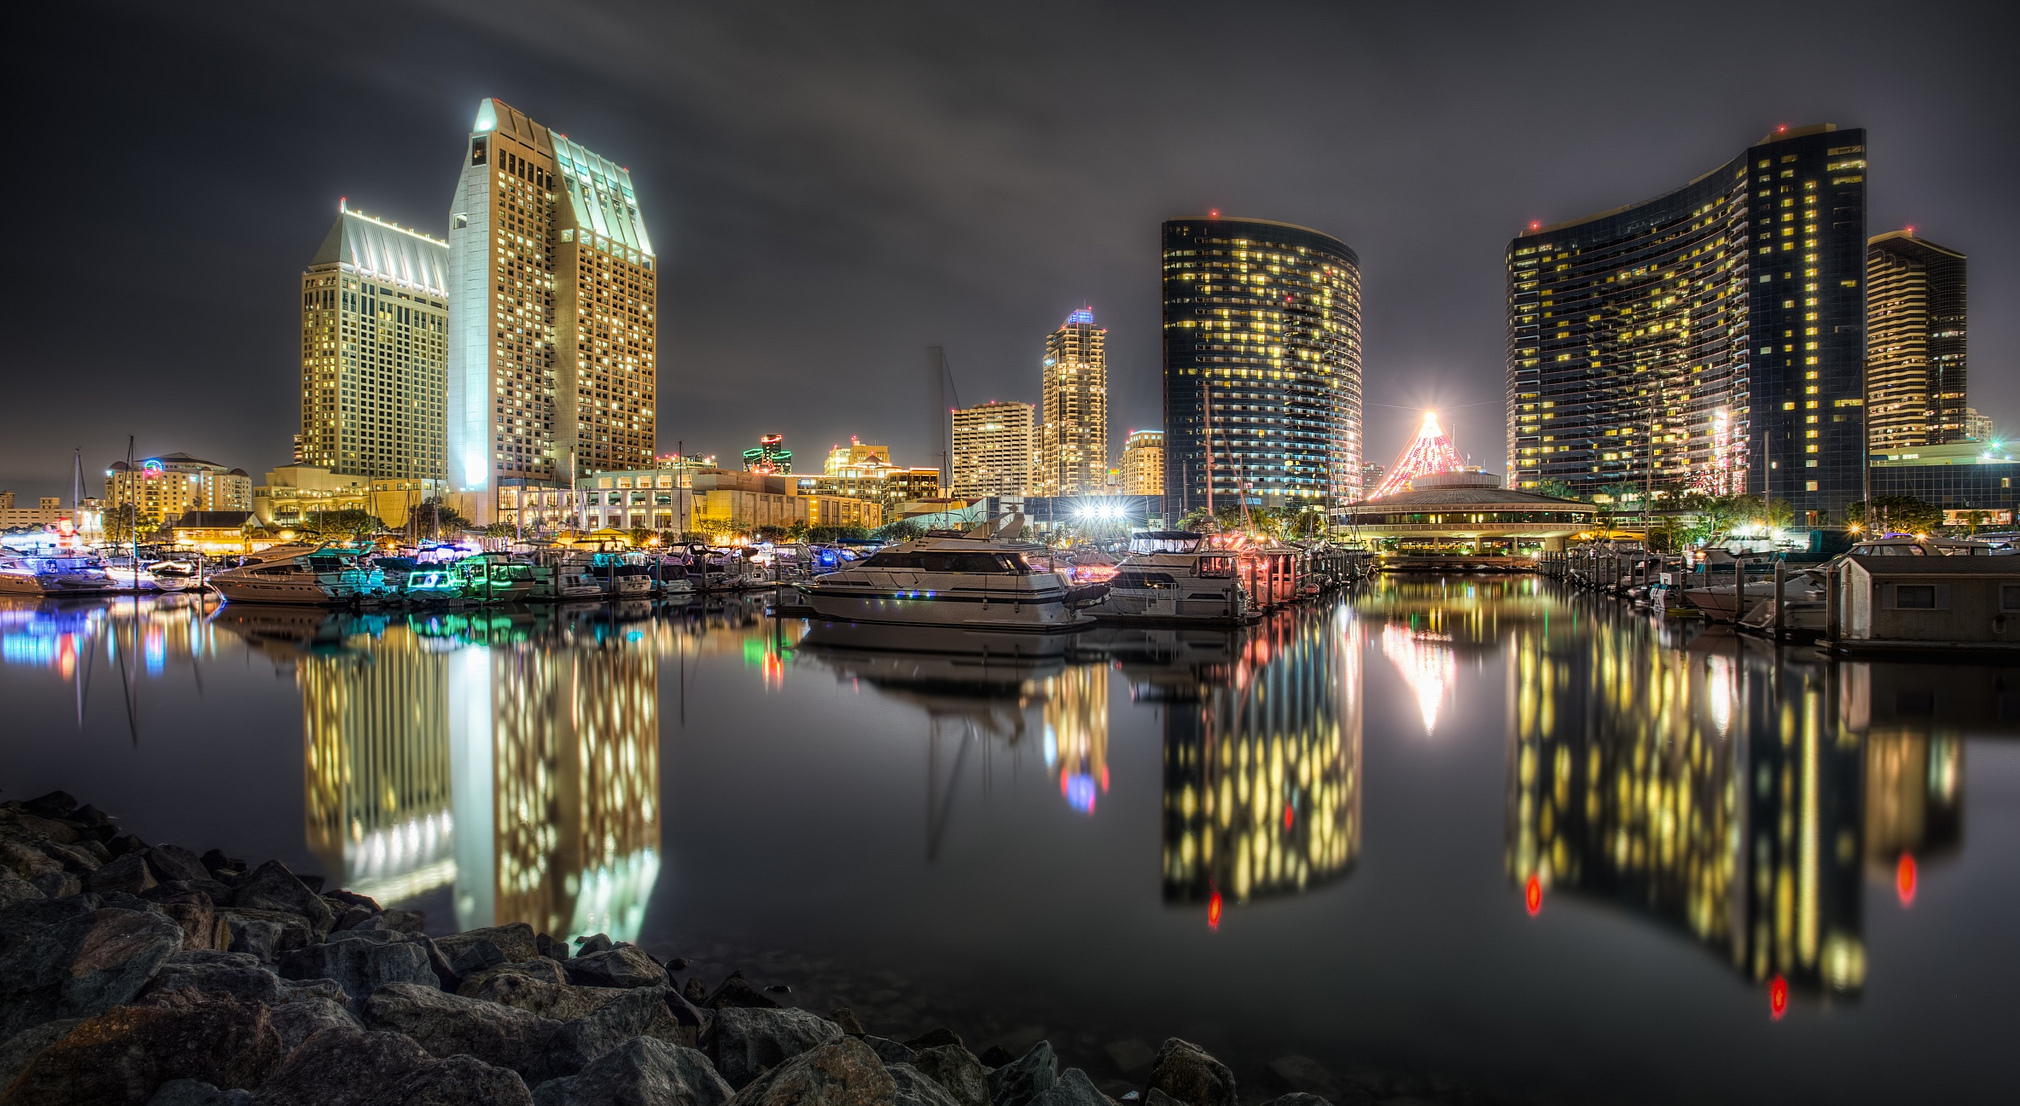 6 Reasons San Diego has Usurped San Francisco as the Best Place to Start a Tech Company post image